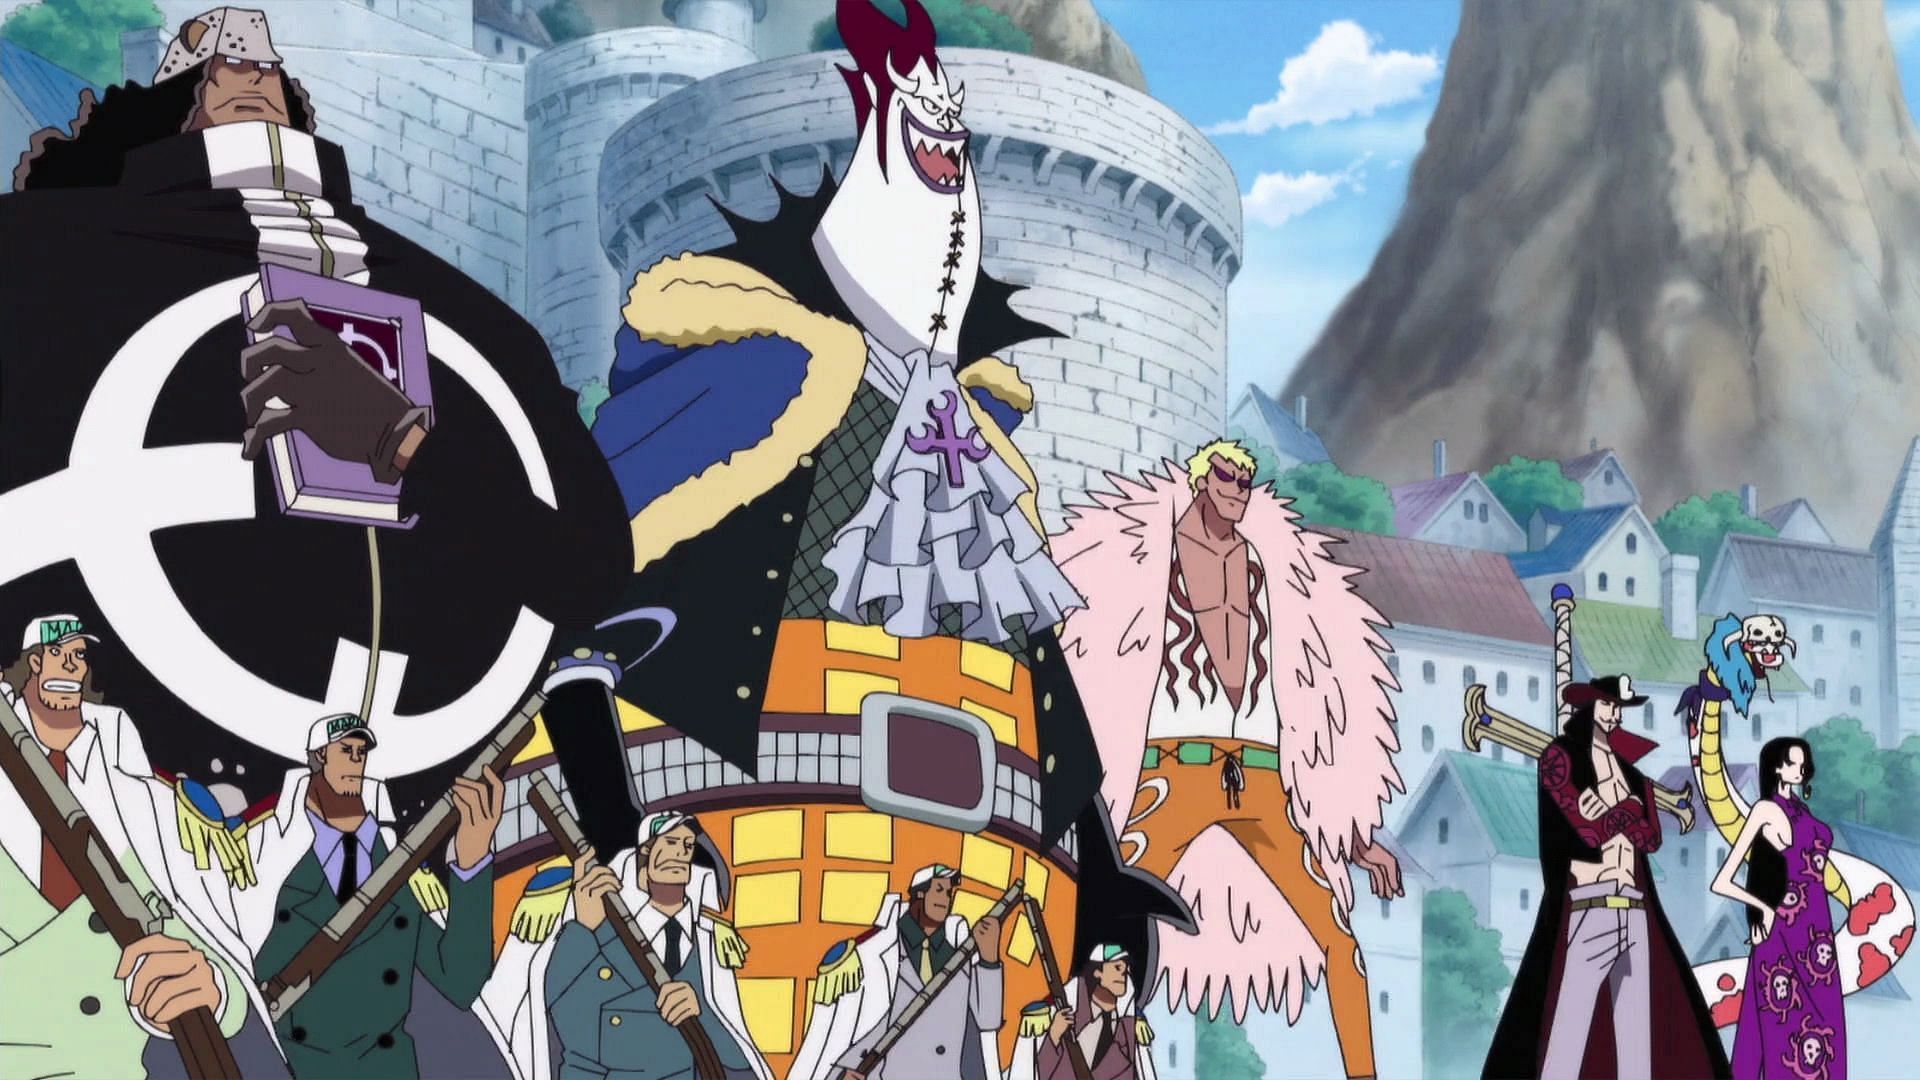 The final members of the Shichibukai-based Seraphim models have seemingly been revealed in One Piece